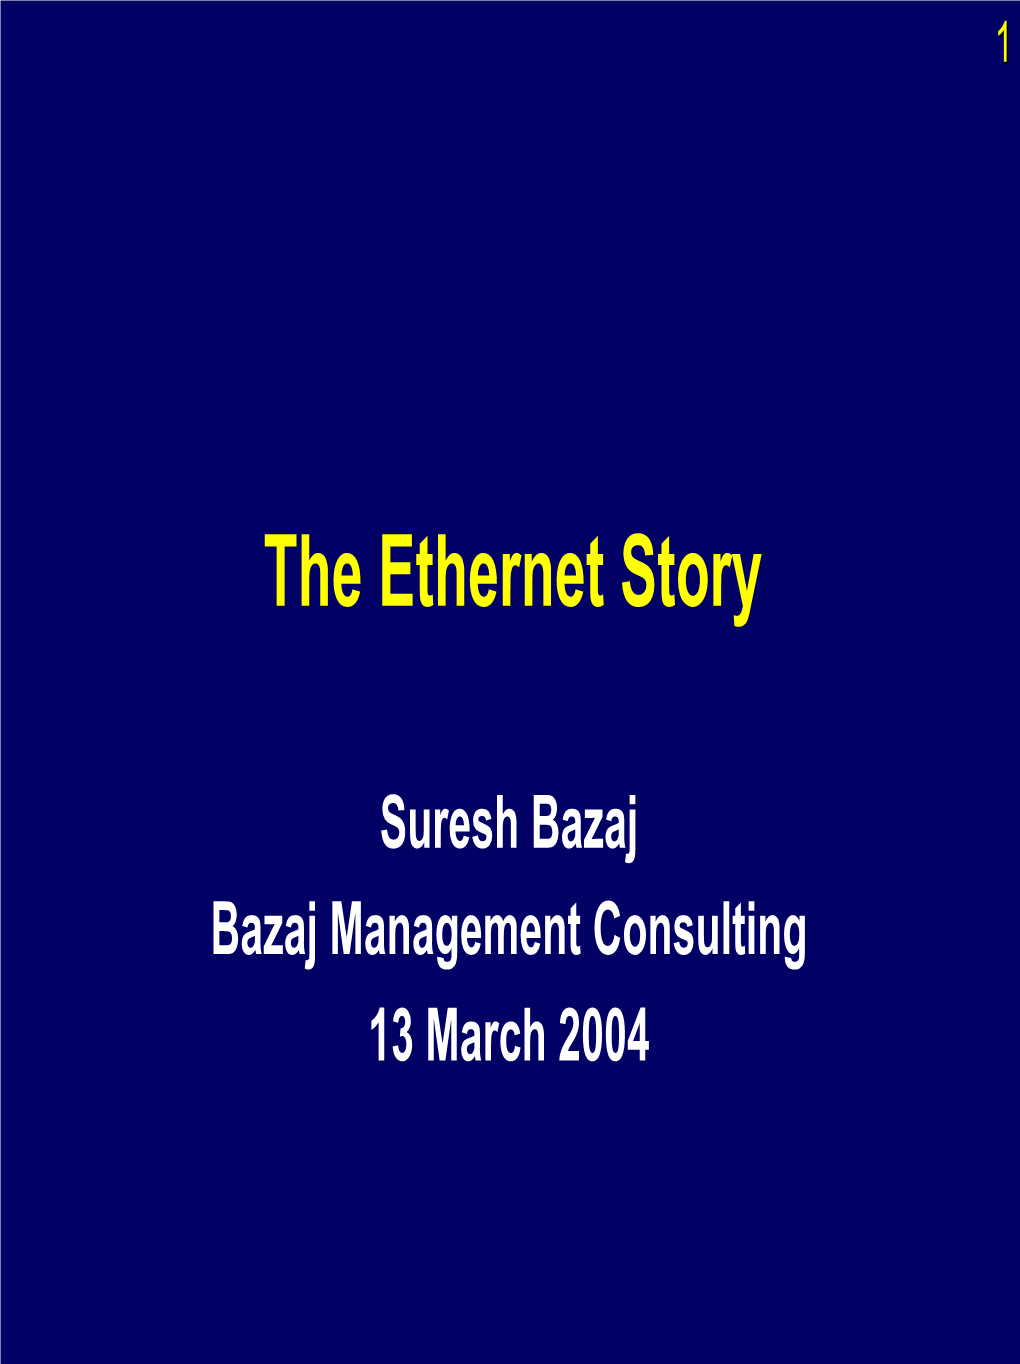 The Ethernet Story